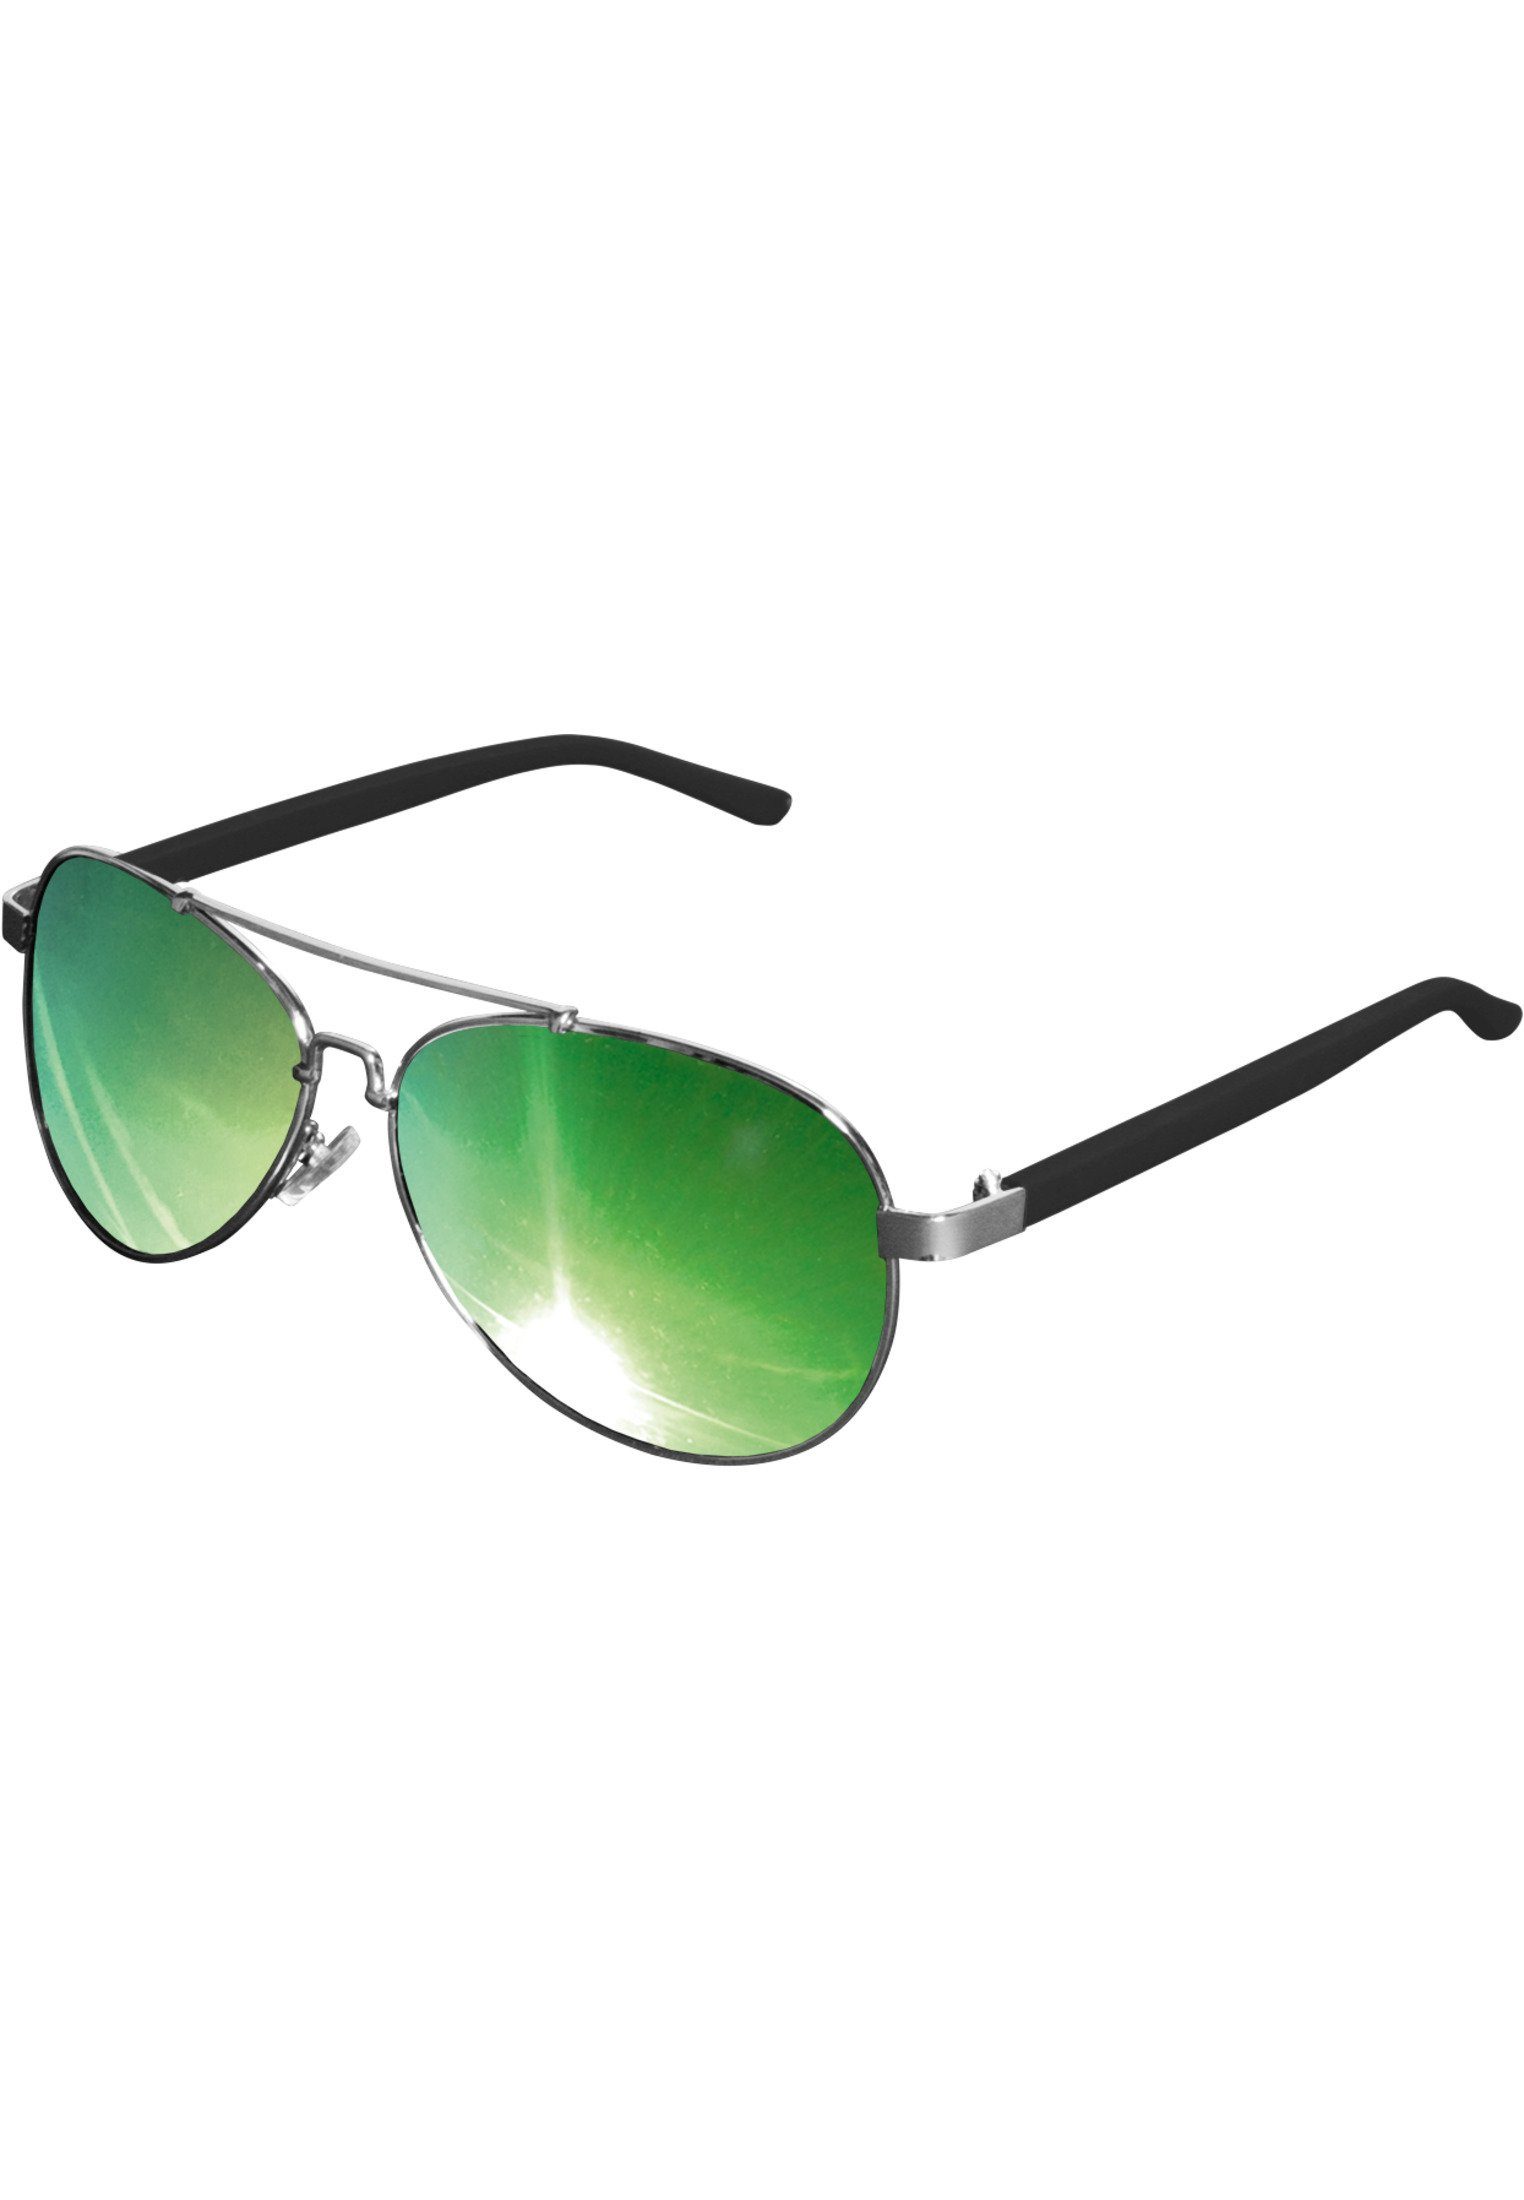 MSTRDS Sonnenbrille Accessoires Sunglasses Mumbo Mirror silver/green